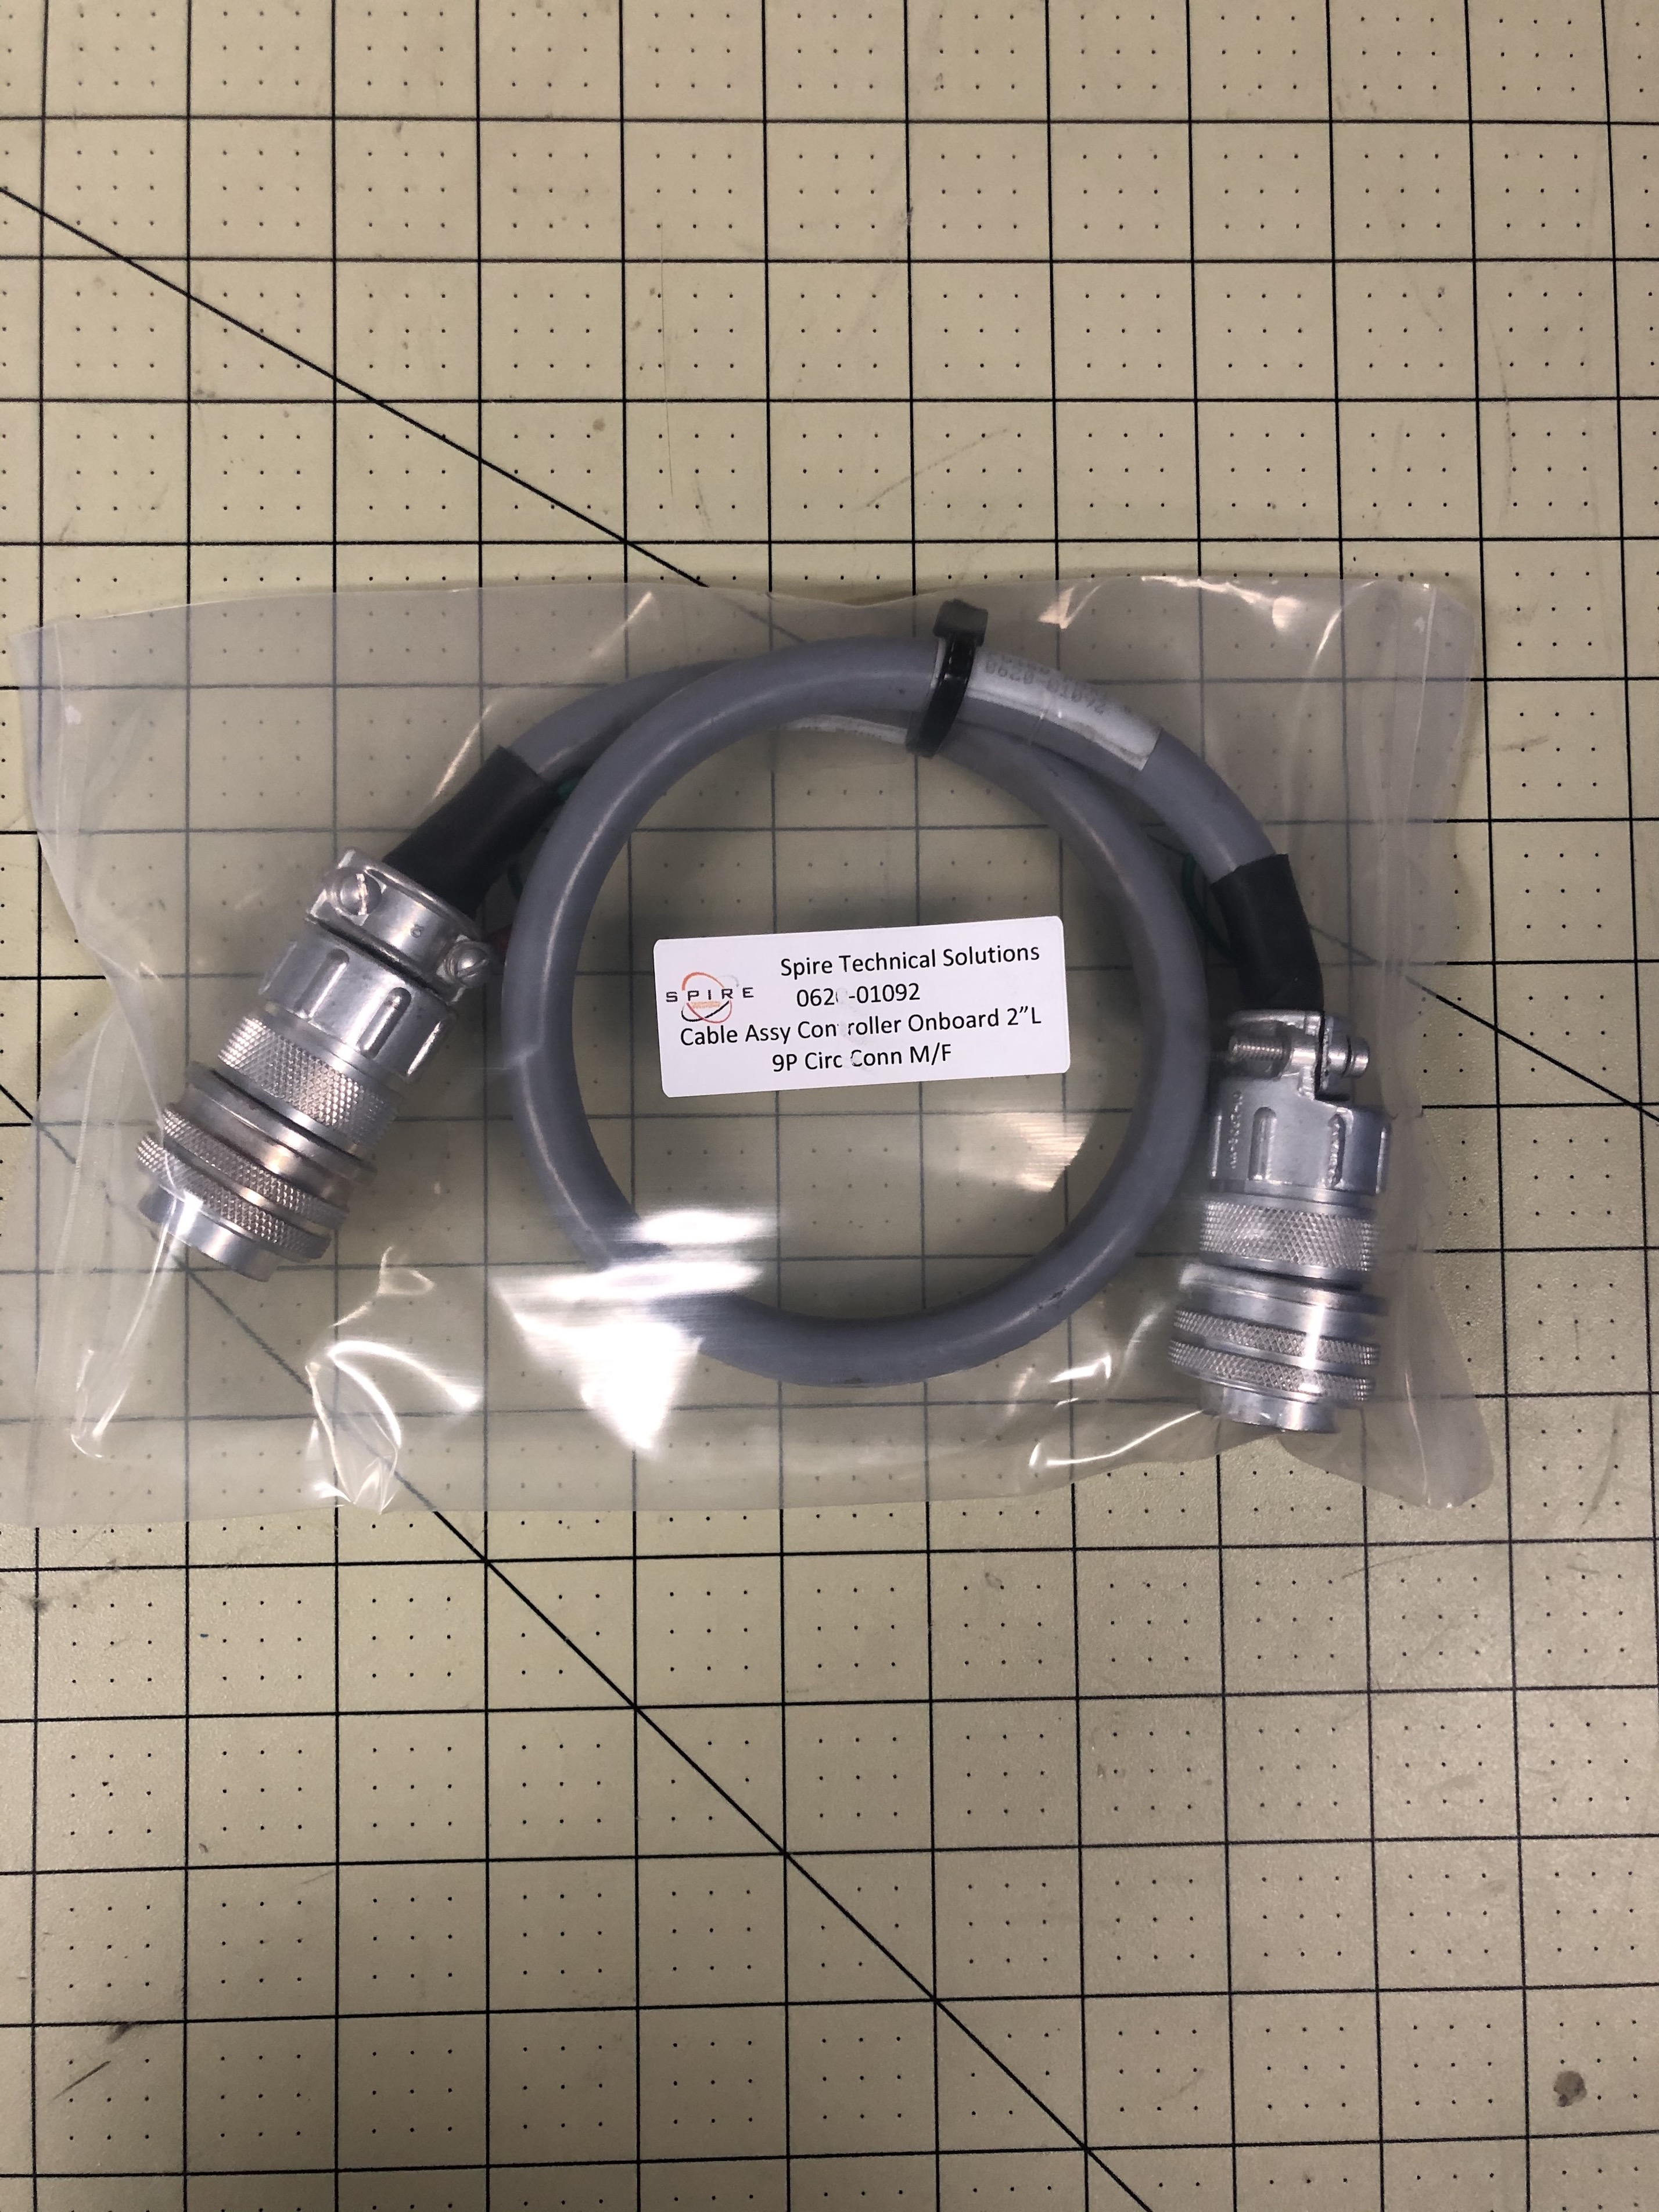 CABLE ASSY CONTROLLER ONBOARD 2'L 9P-CIRC CONN M/F